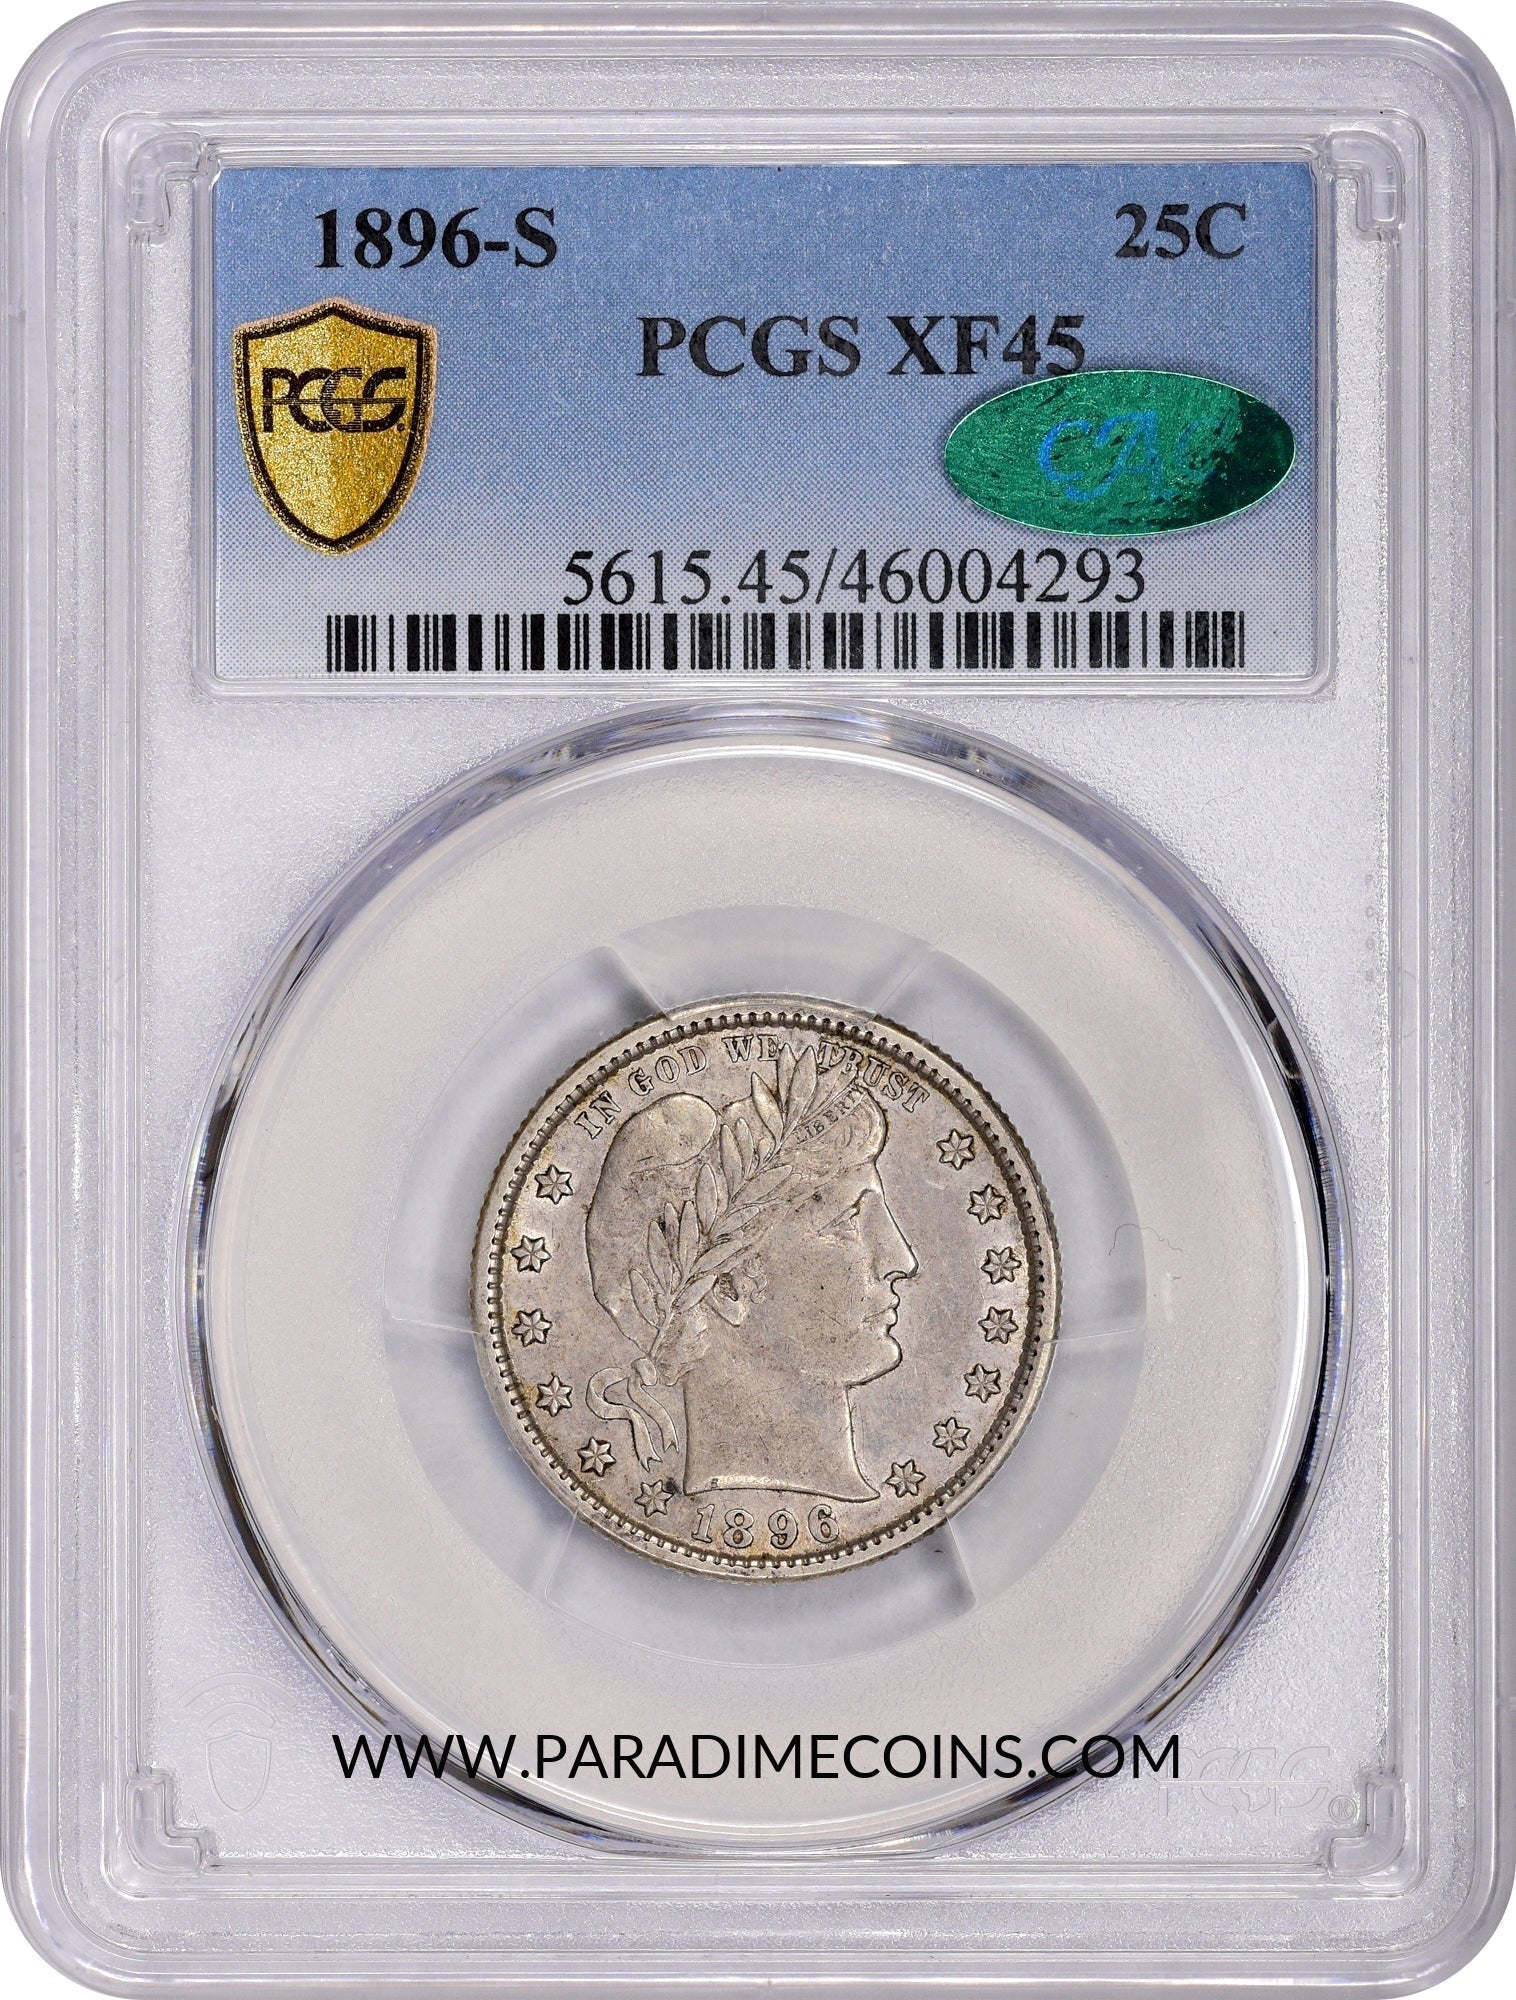 1896-S 25C XF45 PCGS CAC - Paradime Coins | PCGS NGC CACG CAC Rare US Numismatic Coins For Sale